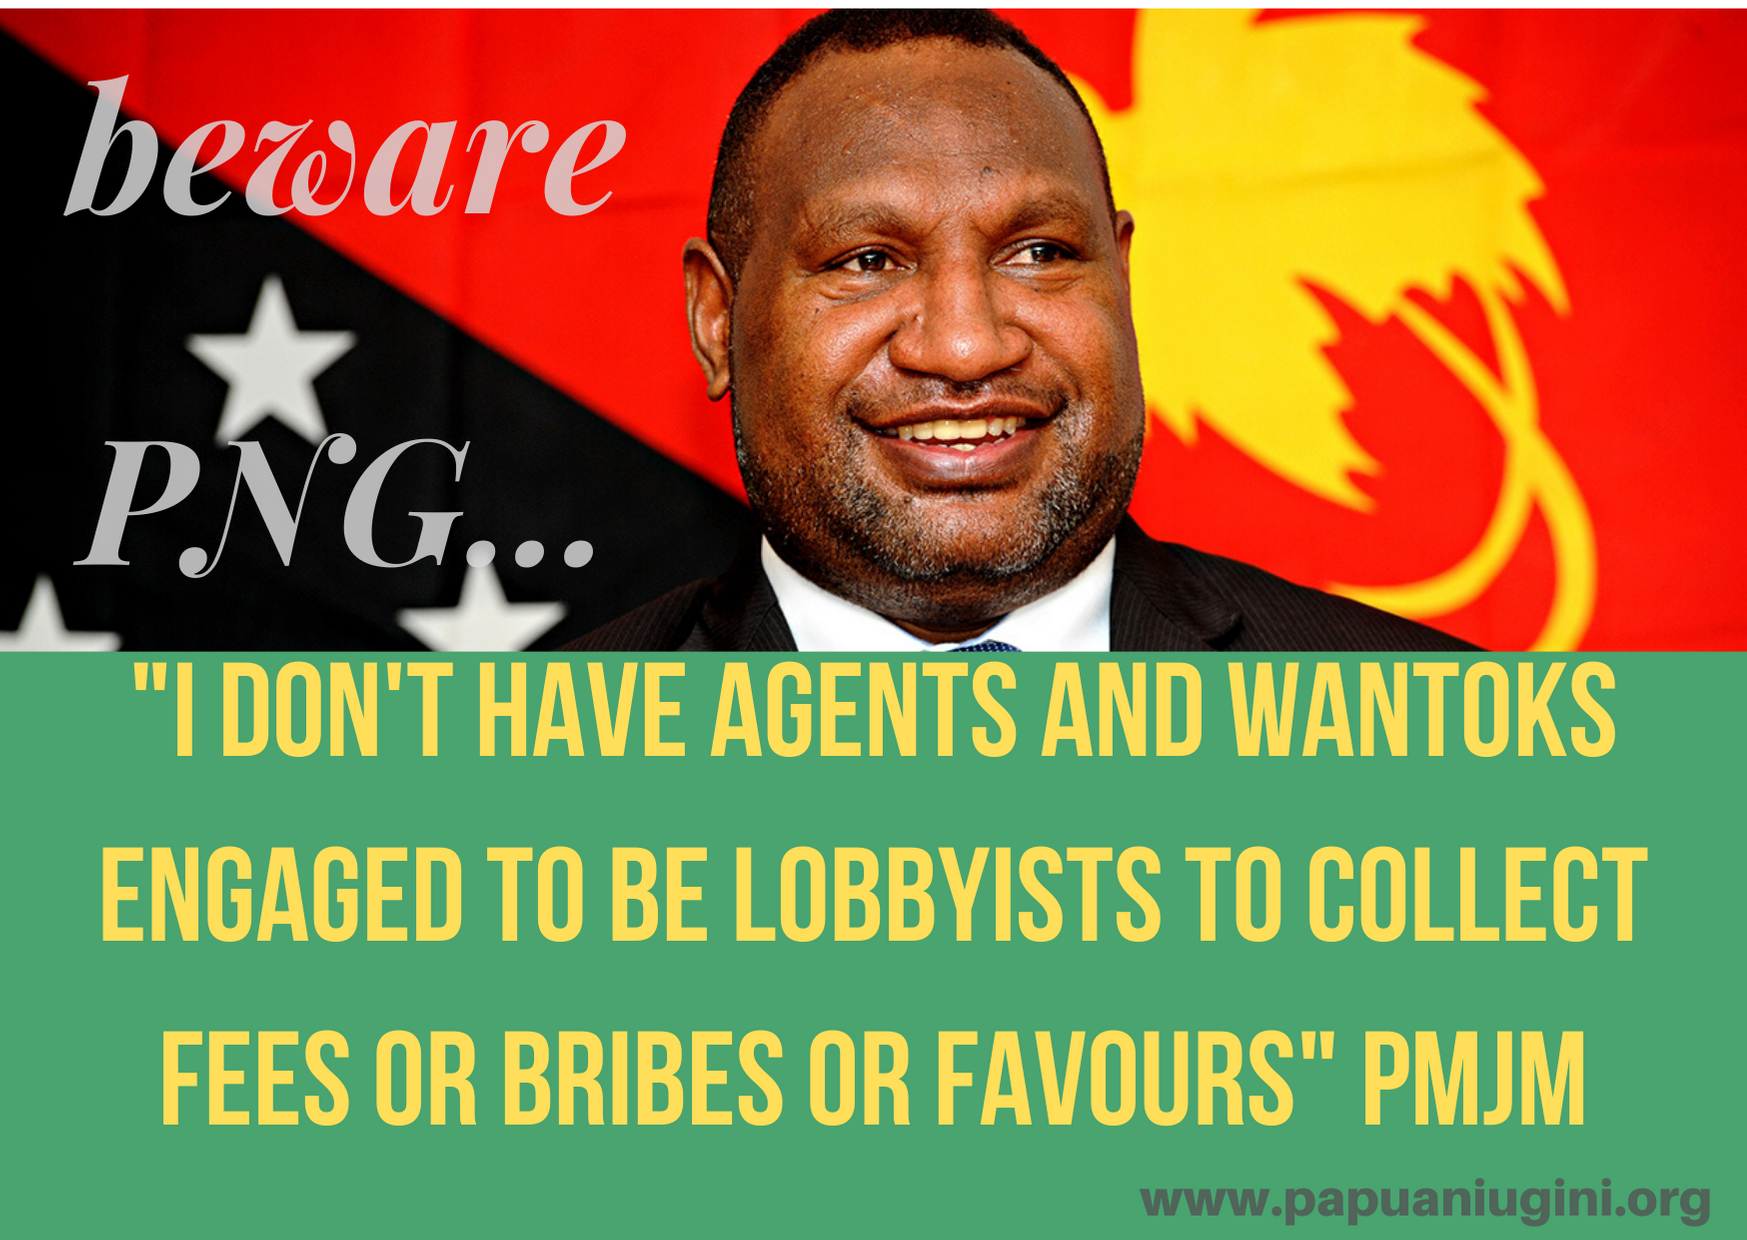 I DONT HAVE AGENTS AND WANTOKS ENGAGED TO BE LOBBYISTS TO COLLECT FEES OR BRIBES OR FAVOURS